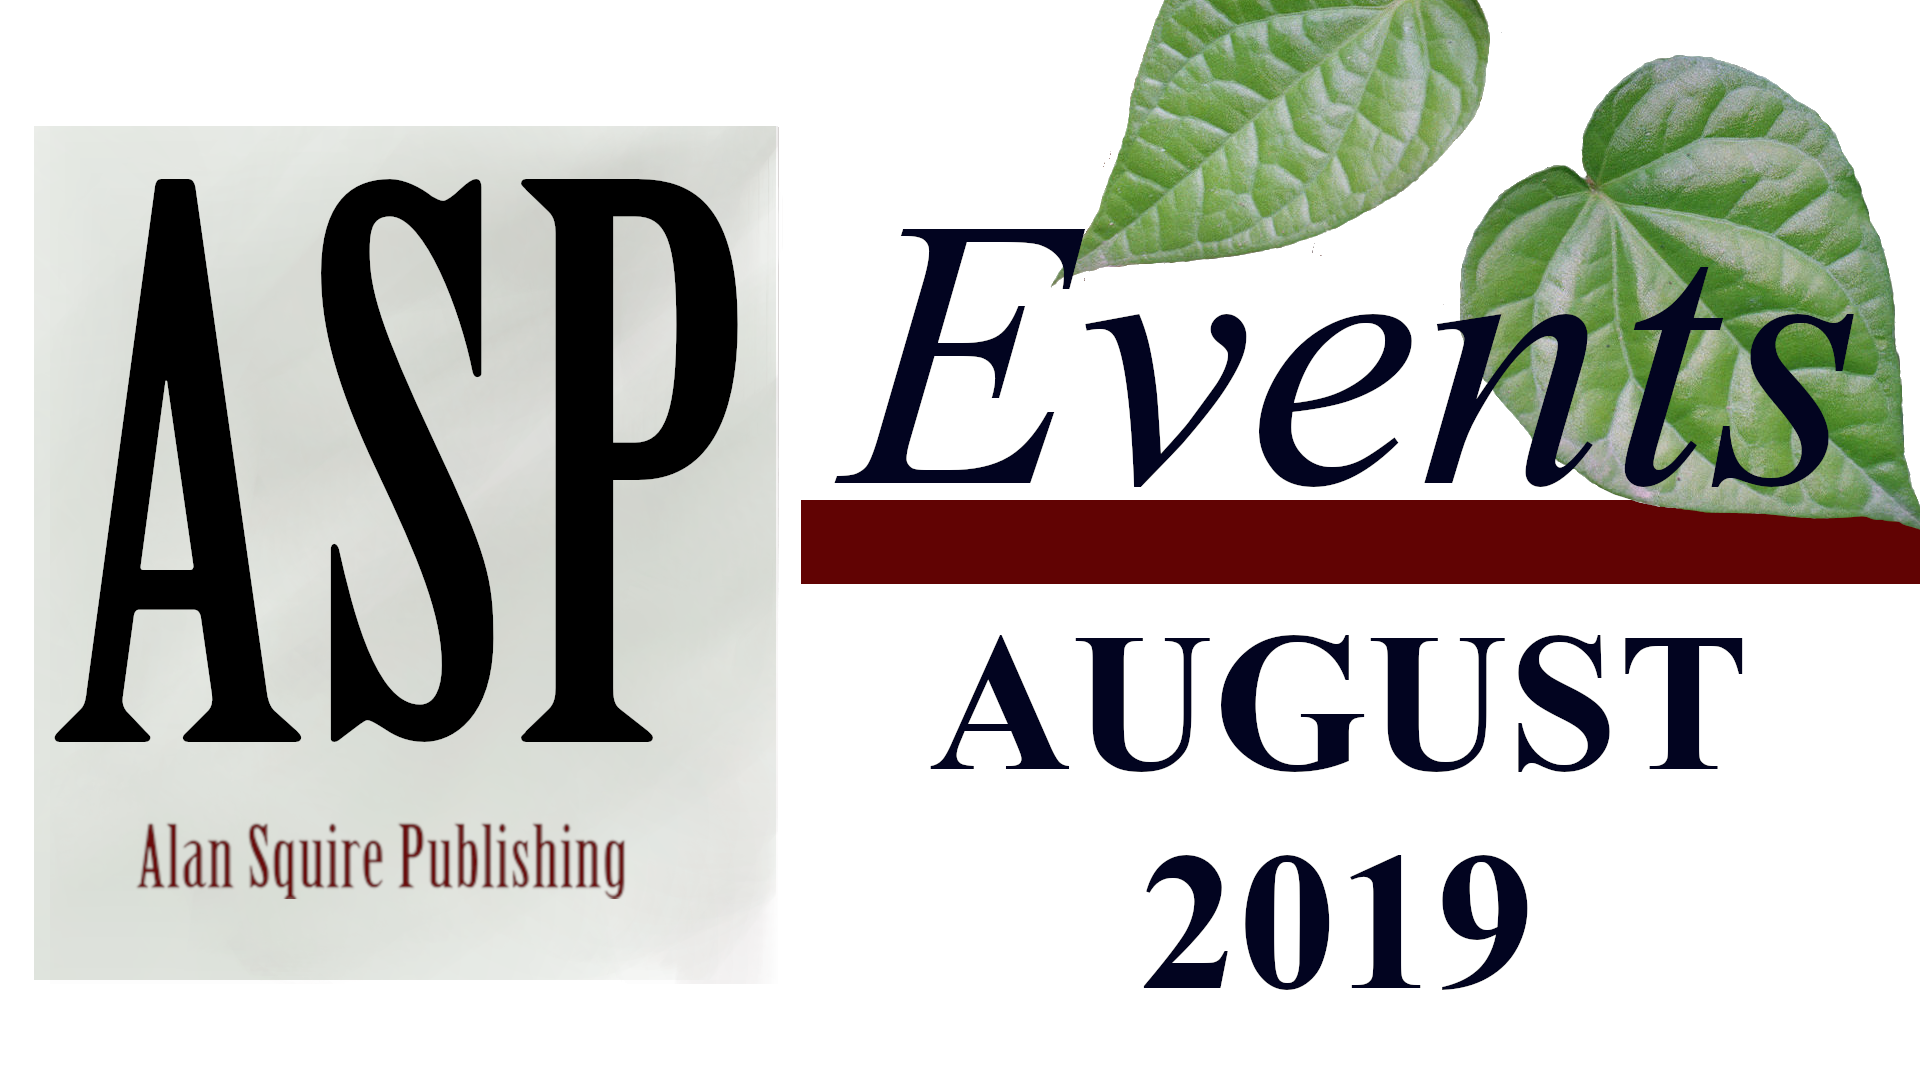 ASP and its authors have four awesome events to recommend for lovers of literature and supporters of indie publishing.